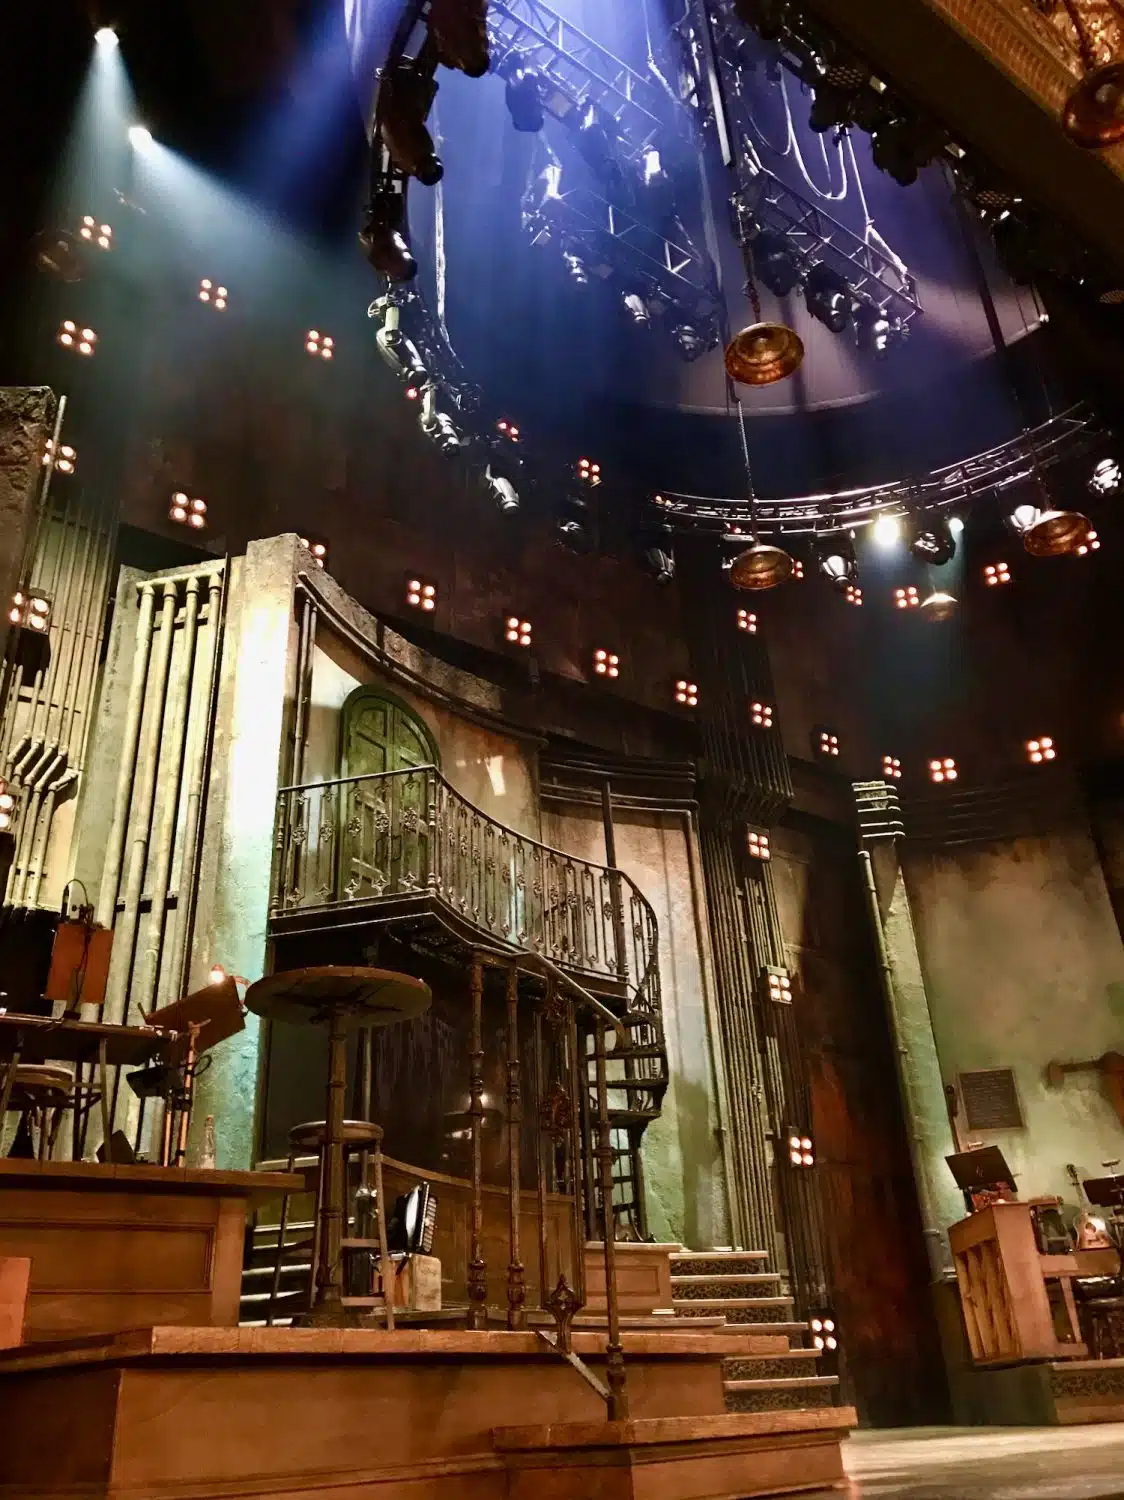 The stage and set for Hadestown in NYC.